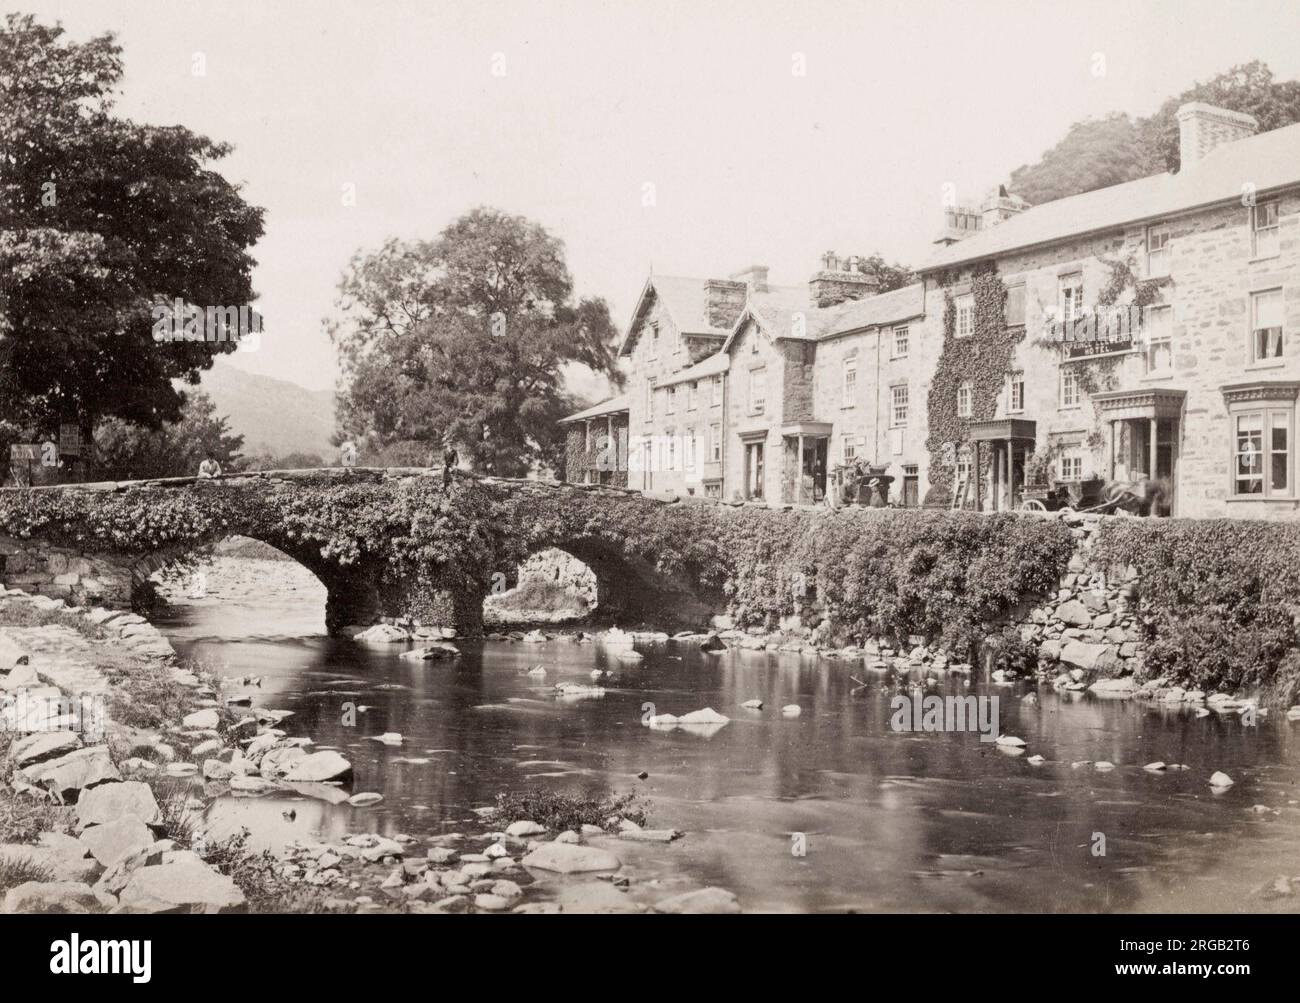 Vintage 19th century photograph: Beddgelert is a village and community in the Snowdonia area of Gwynedd, Wales. Stock Photo